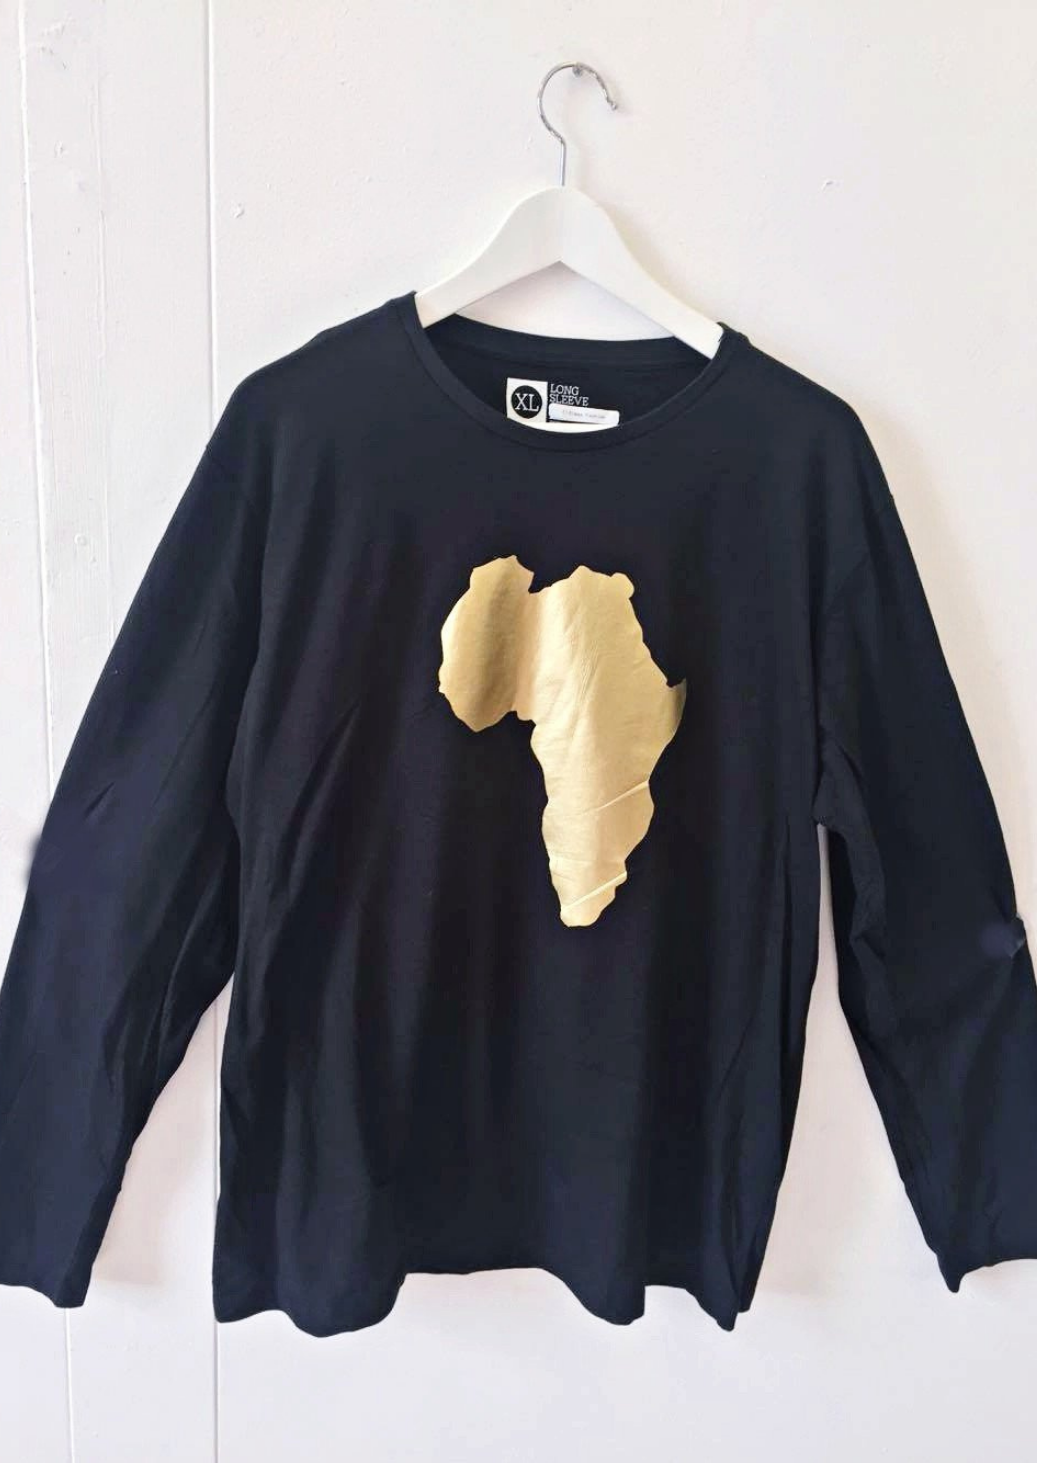 The men's black long sleeve top with round neckline and gold map of Africa graphic.